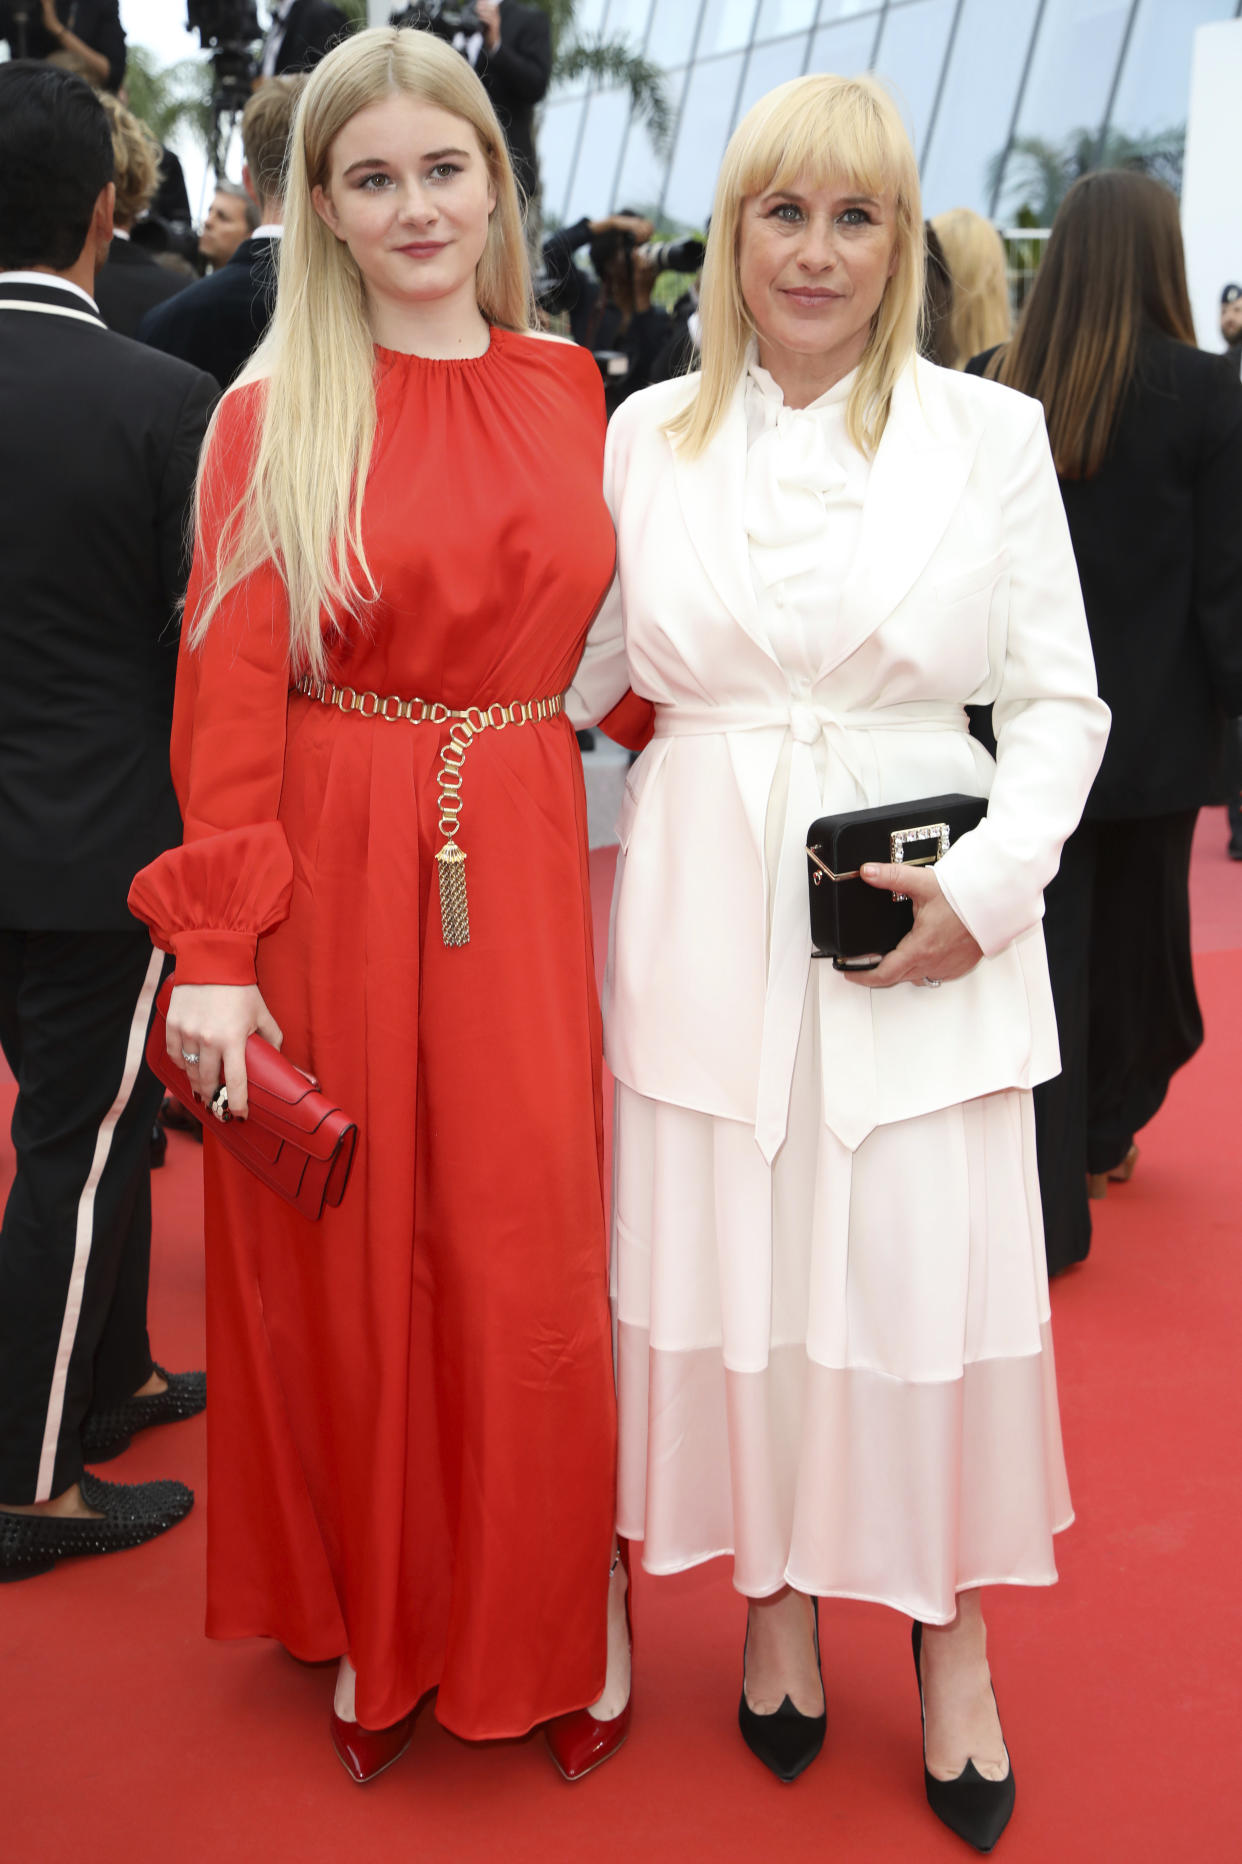 Actress Patricia Arquette, right, and Harlow Olivia Calliope Jane pose for photographers upon arrival at the premiere of the film 'Sibyl' at the 72nd international film festival, Cannes, southern France, Friday, May 24, 2019. (Photo by Vianney Le Caer/Invision/AP)